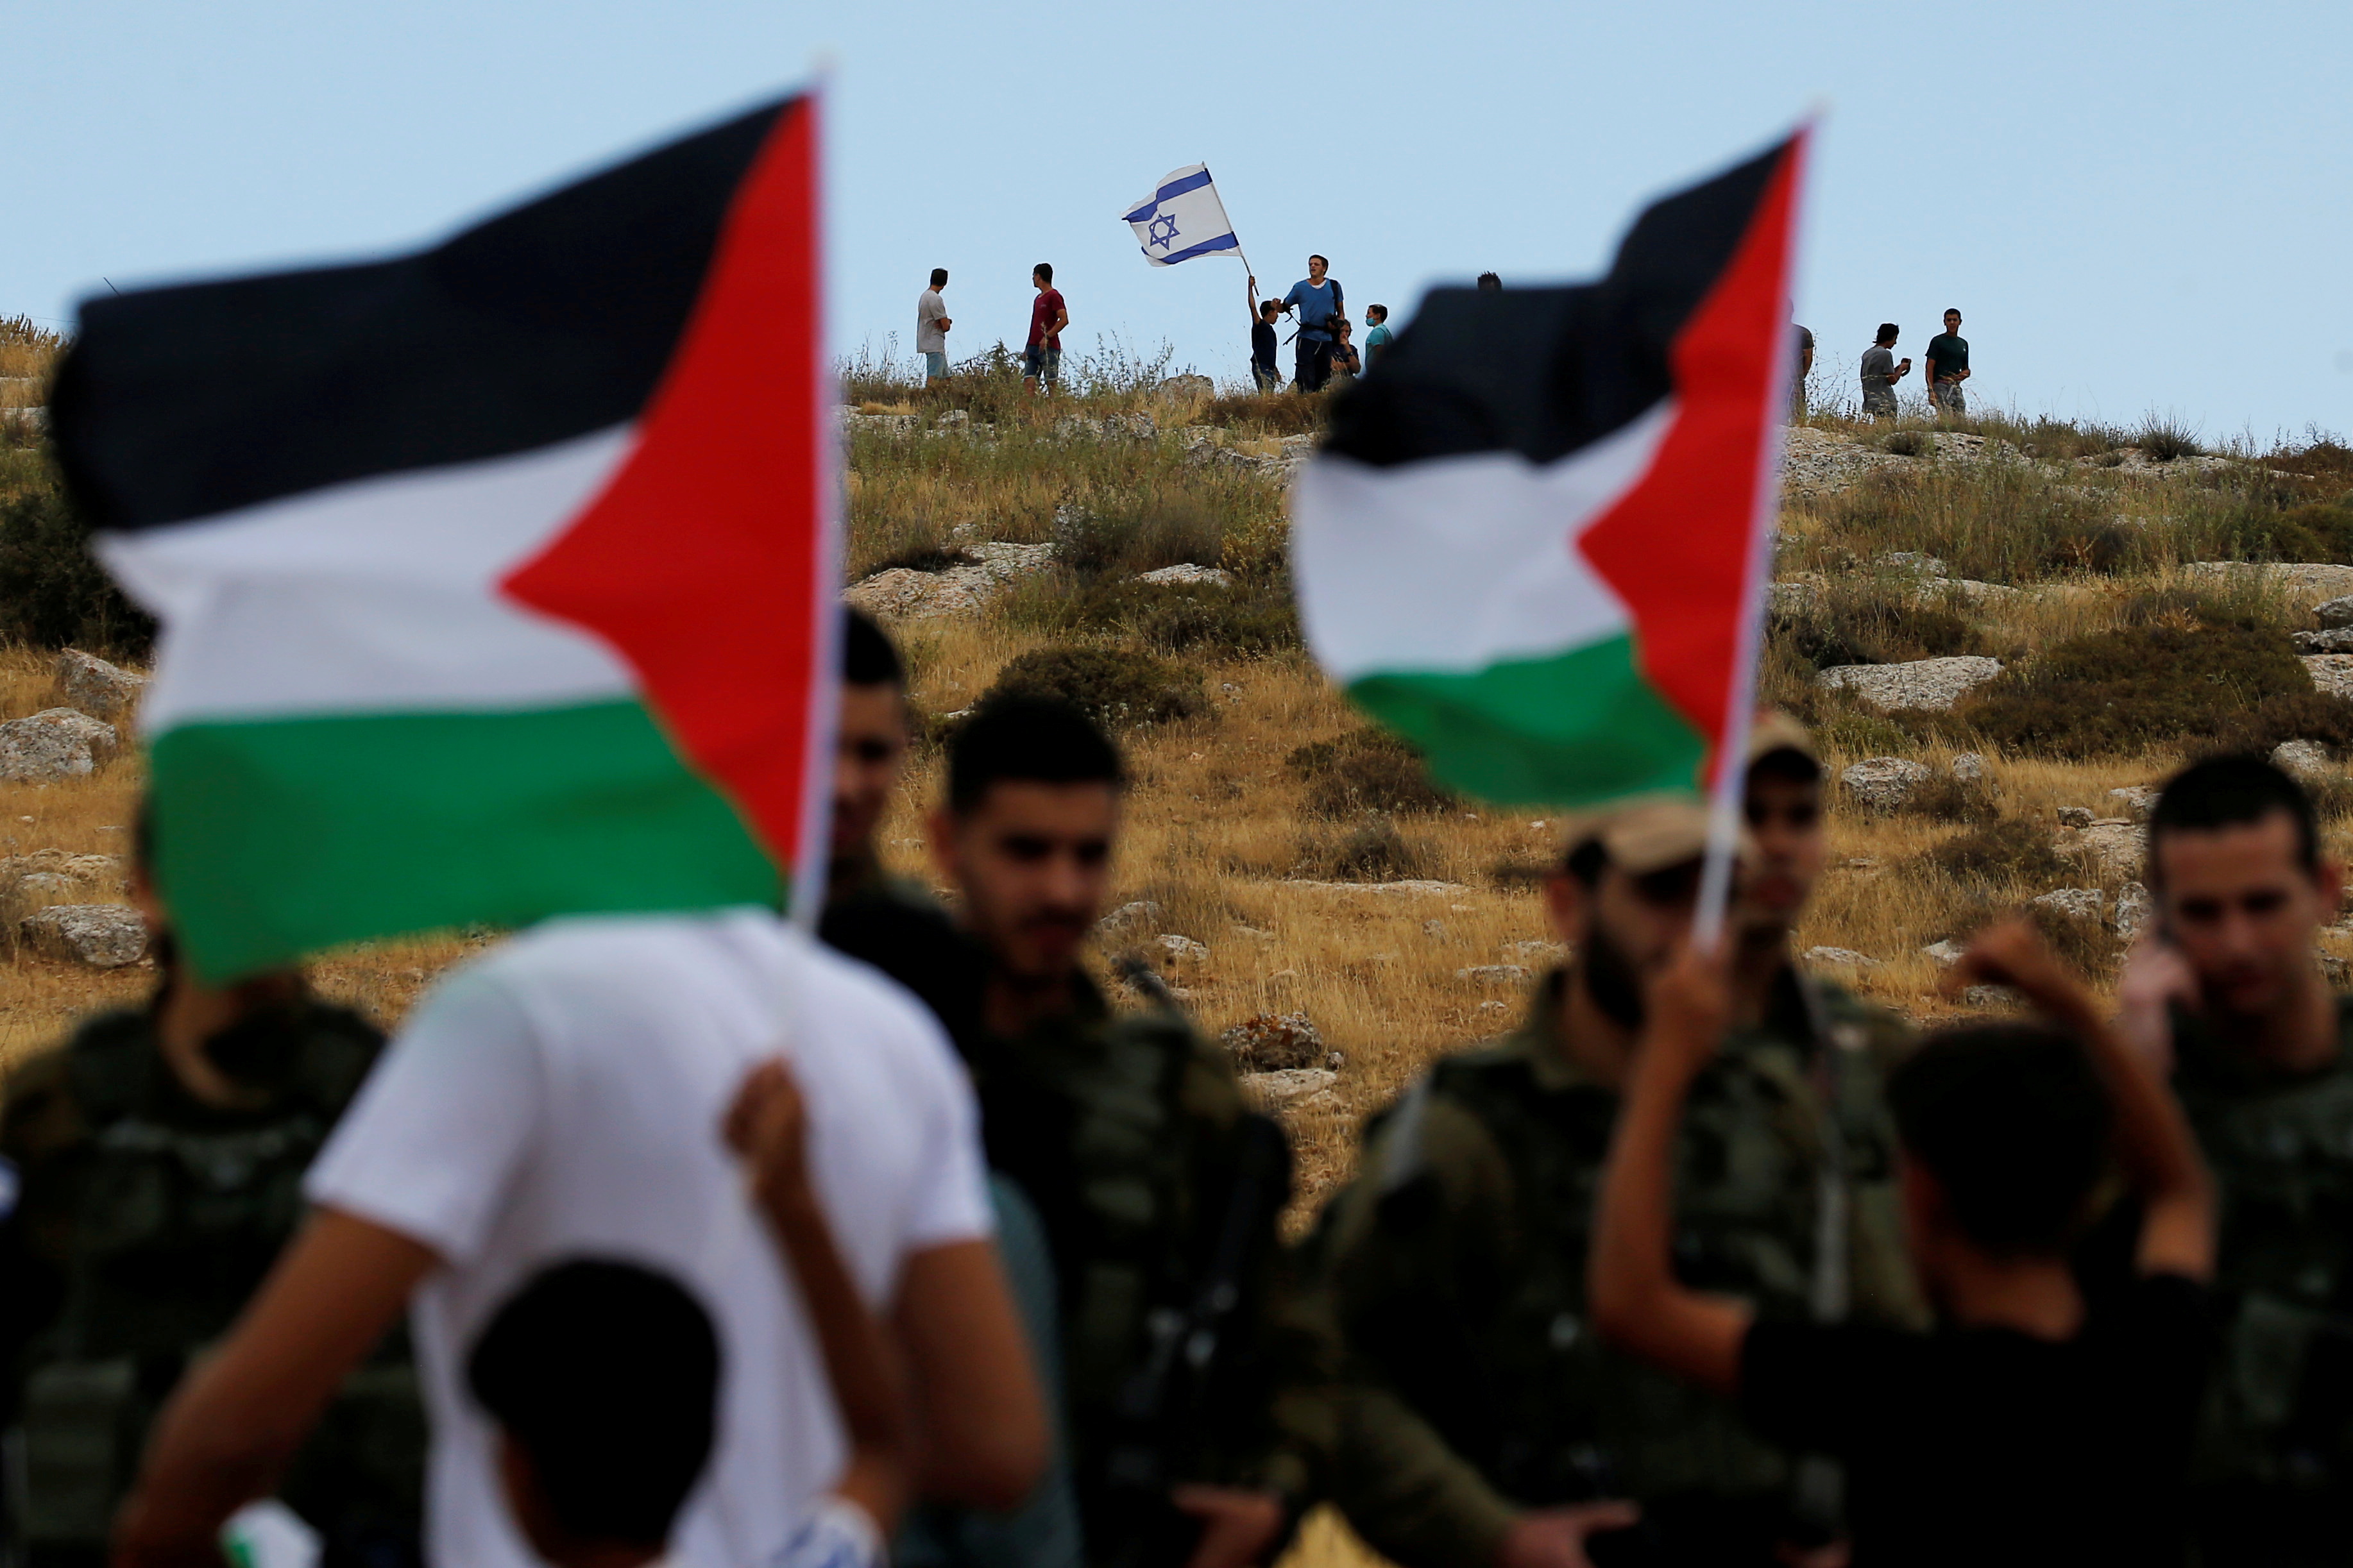 Palestinians protest against Israel's plan to annex parts of the occupied West Bank